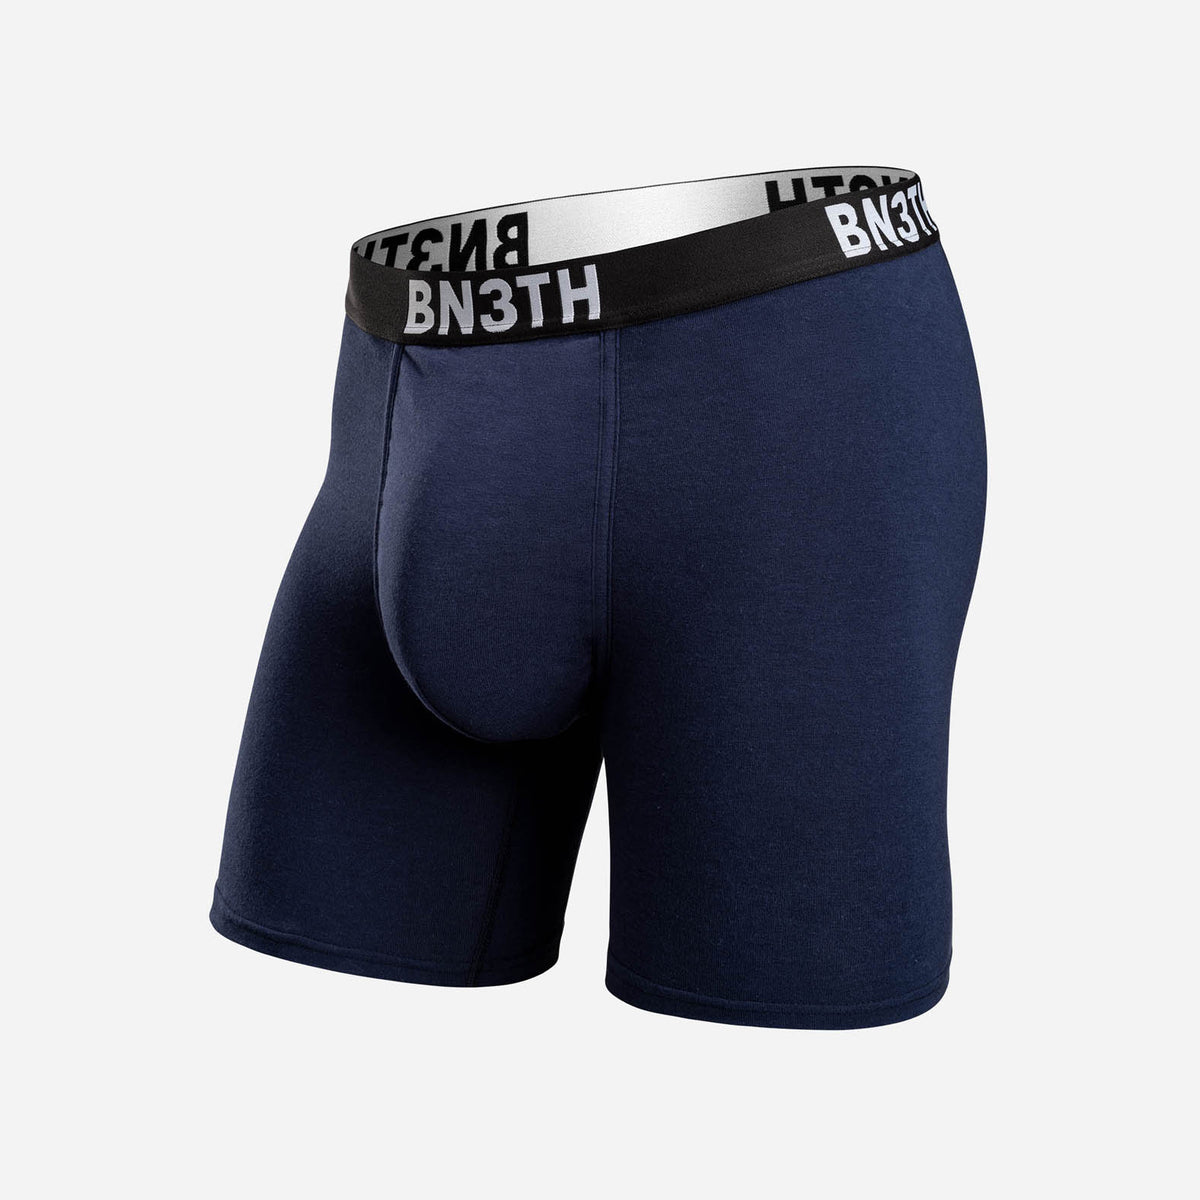 BN3TH Classic Boxer Brief Print Space Age-Navy